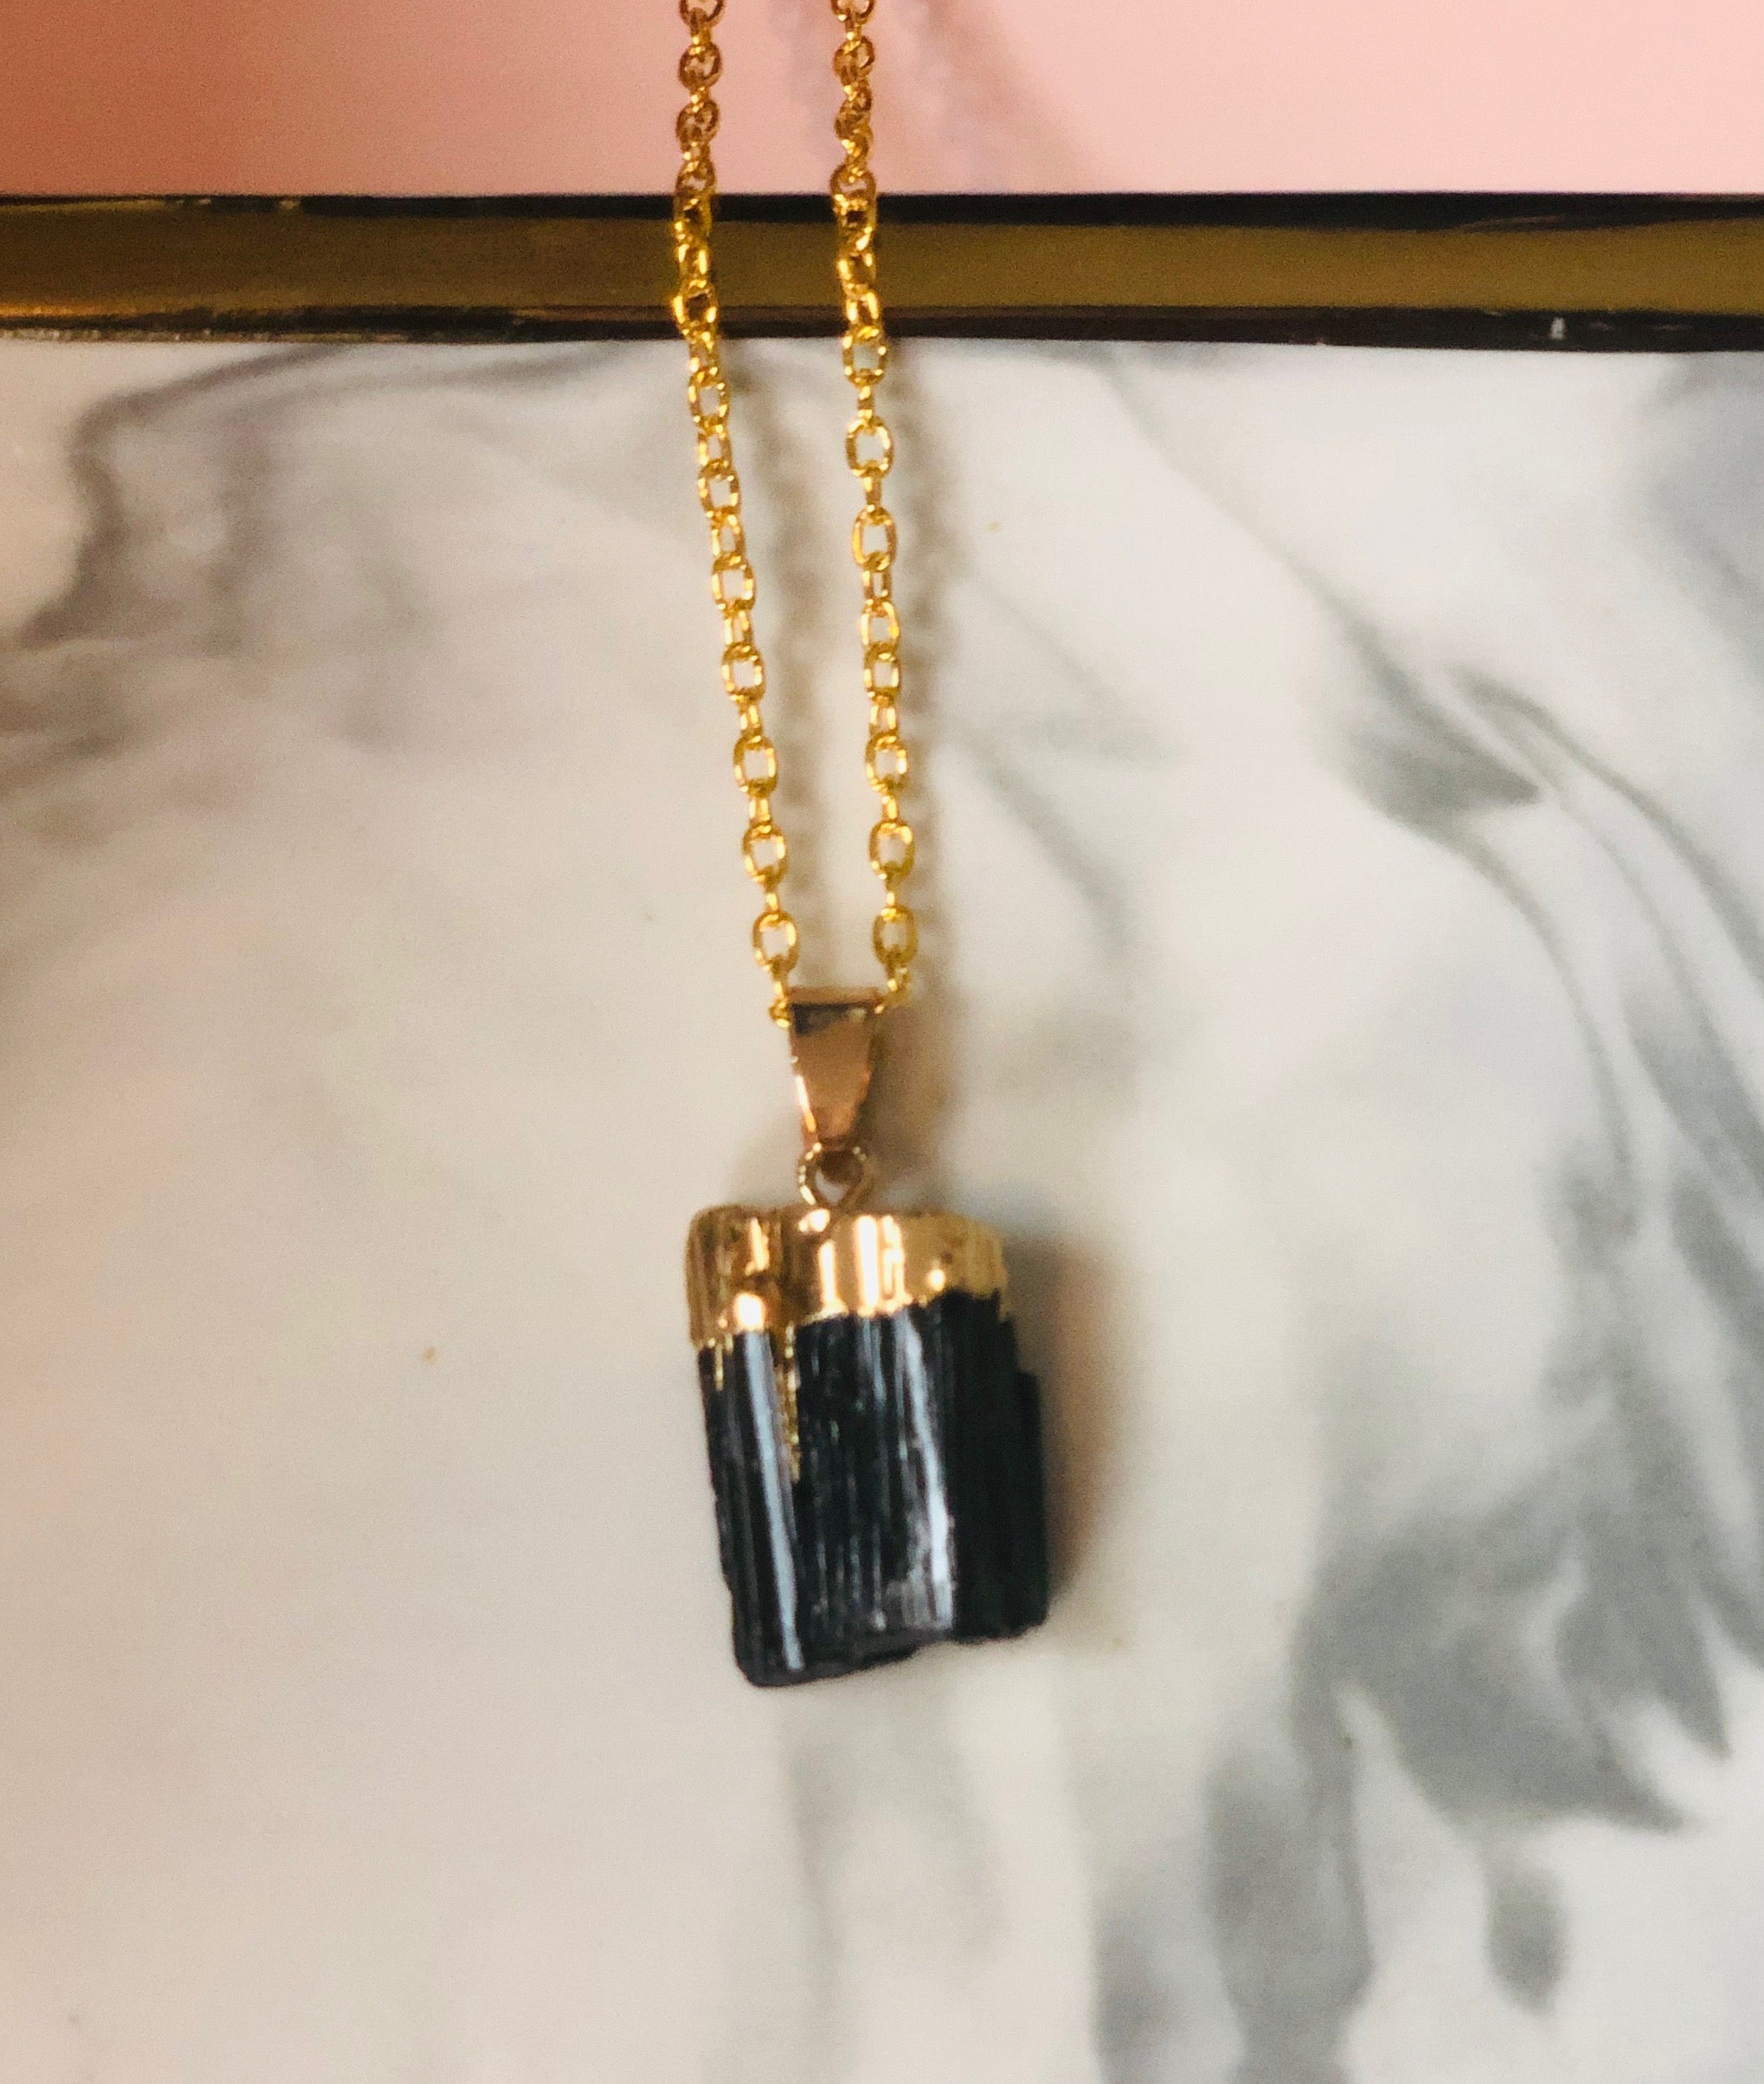 Buy Black Tourmaline Pendant Necklace Raw Natural Stone Black Cord Necklace  Protection From Negative Energy Online in India - Etsy